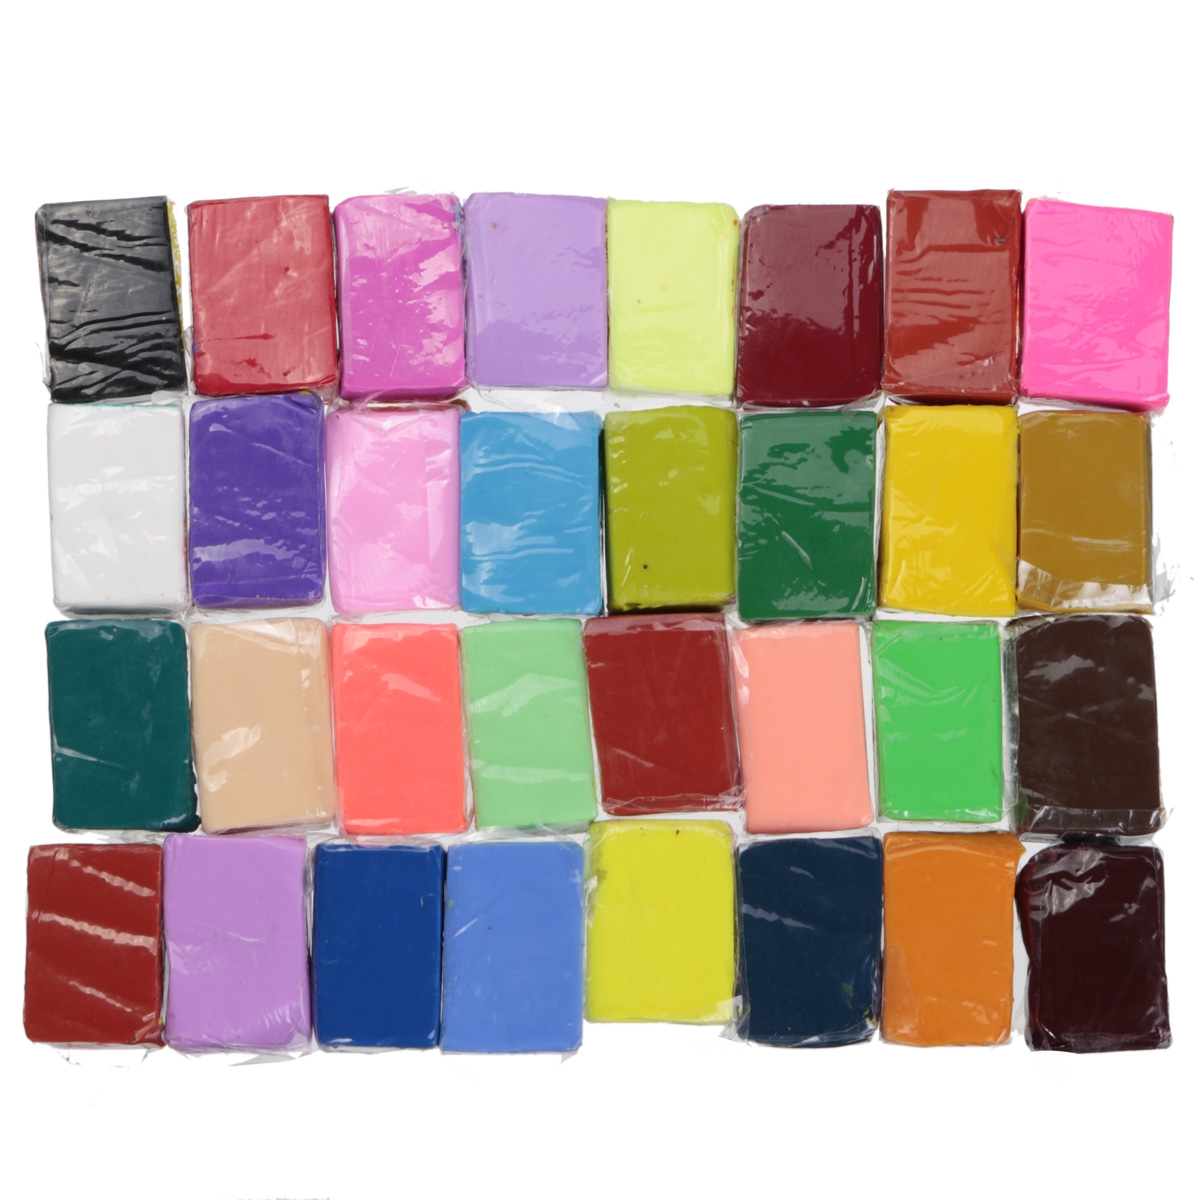 32 Colors Polymer Clay Fimo Block Modelling Moulding Sculpey DIY Toy 5 Tools